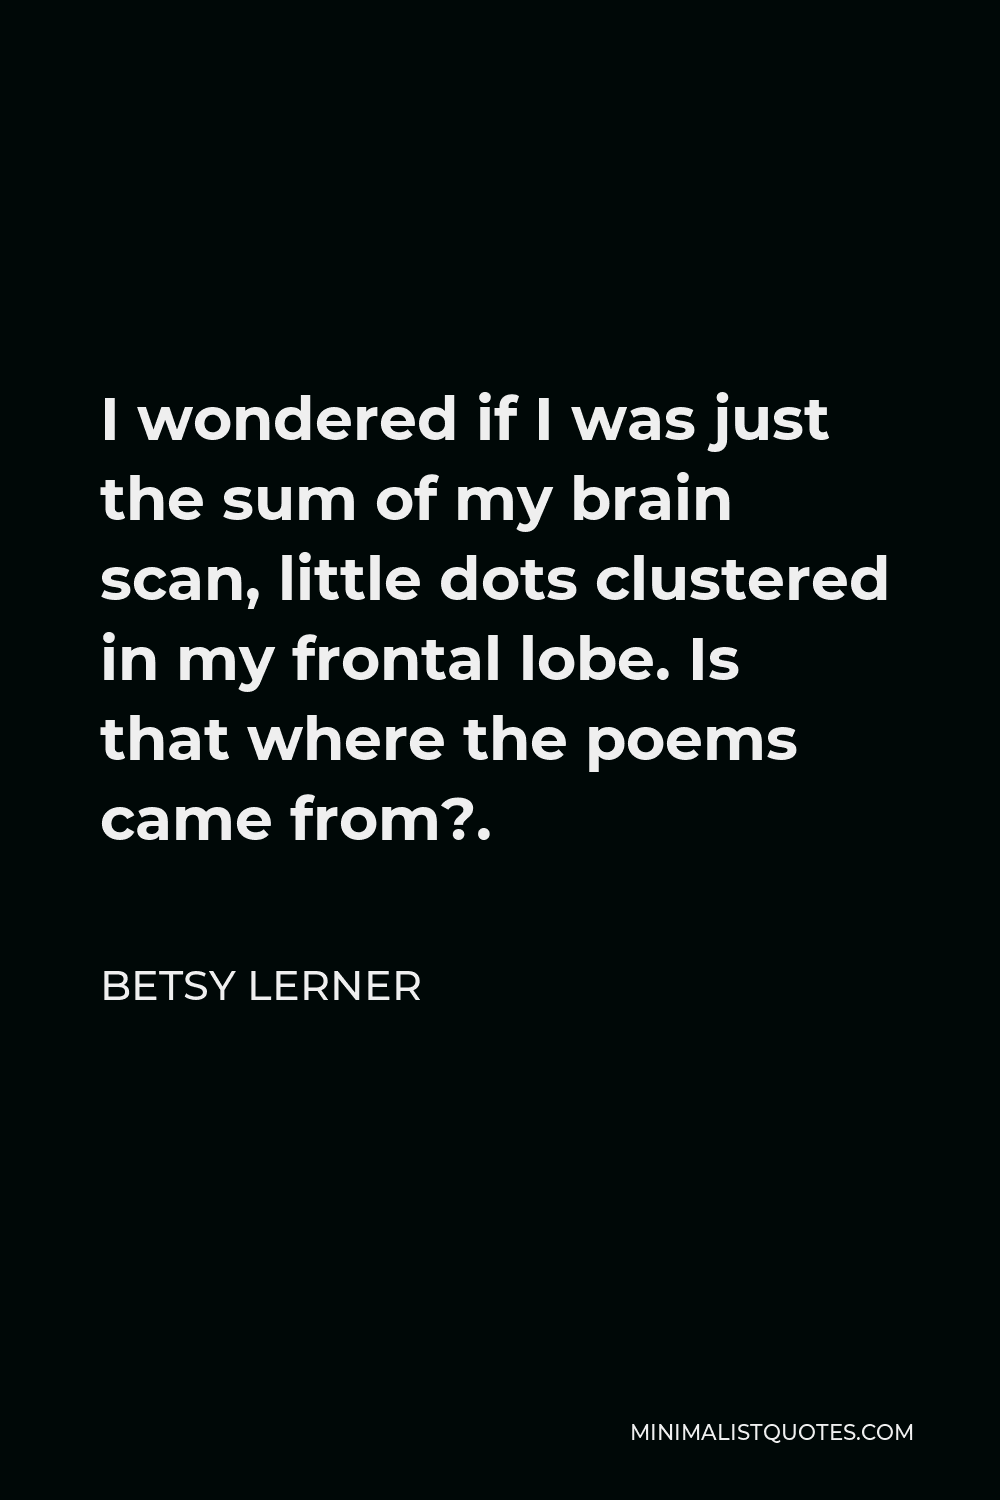 Betsy Lerner Quote - I wondered if I was just the sum of my brain scan, little dots clustered in my frontal lobe. Is that where the poems came from?.